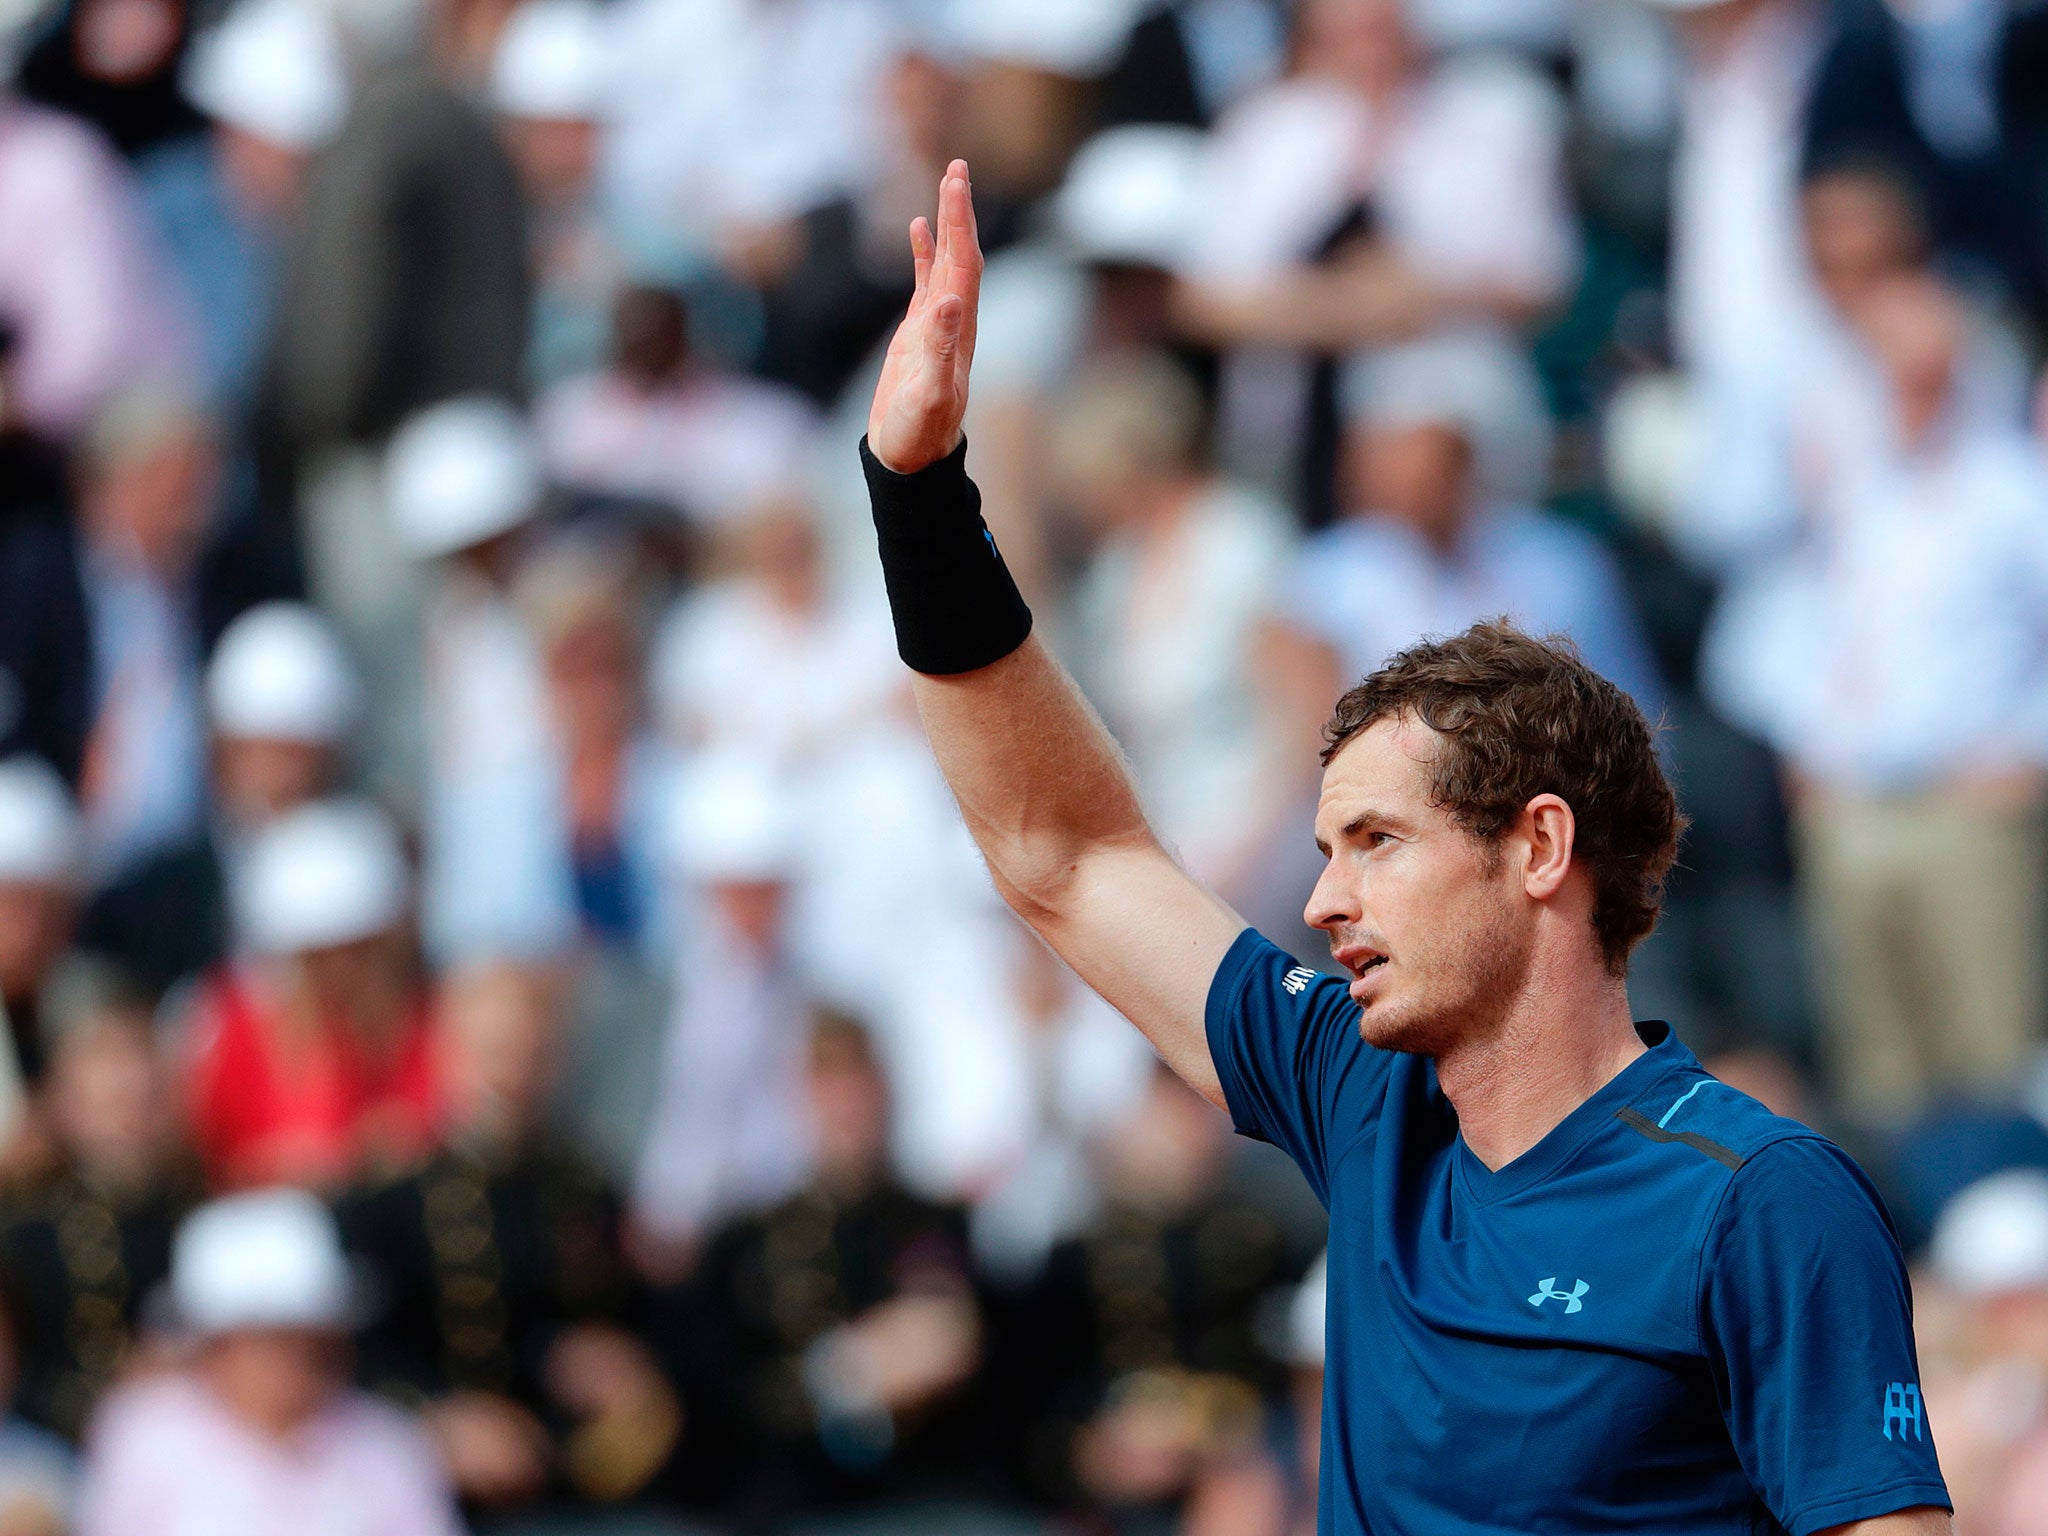 Murray has rediscovered his form in Paris